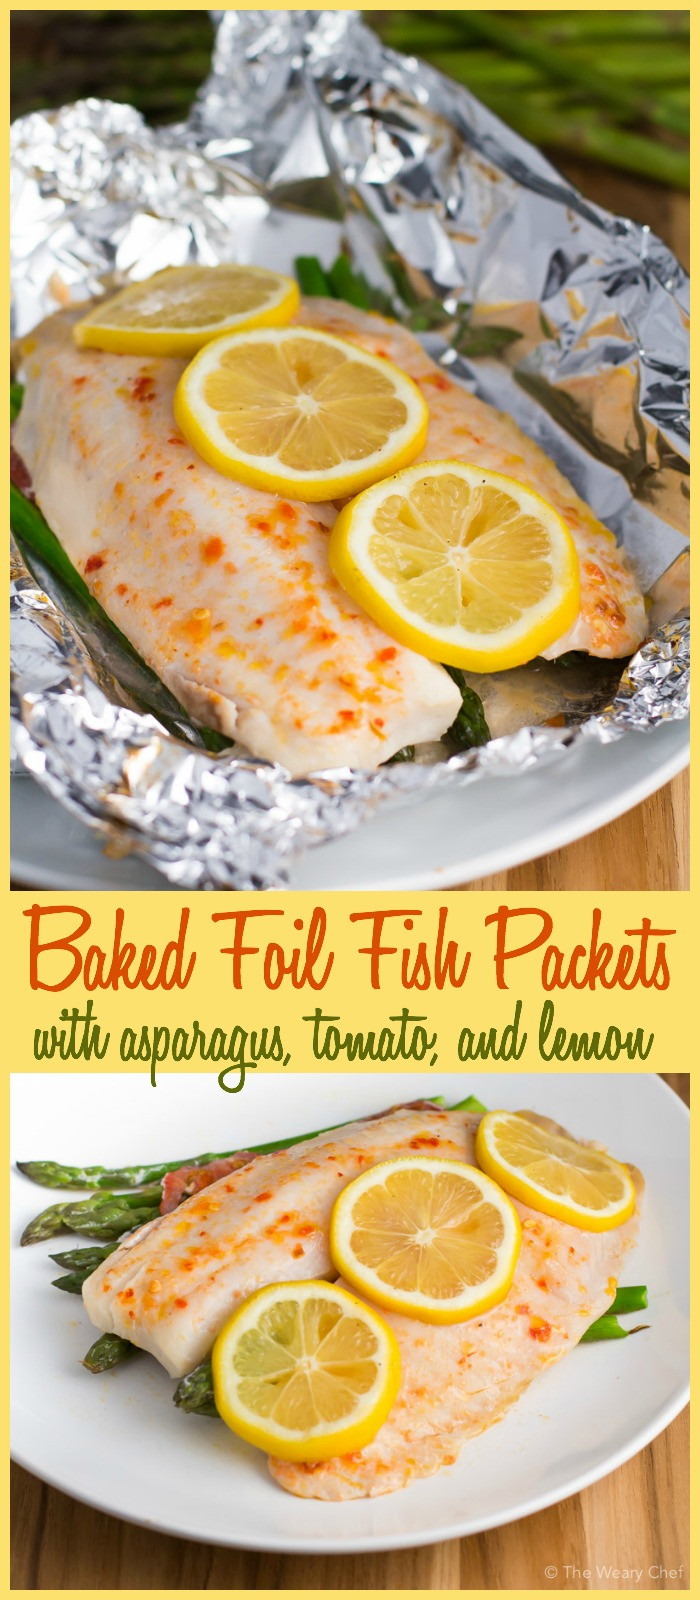 Baked Fish Recipes Healthy
 baked fish in foil packets